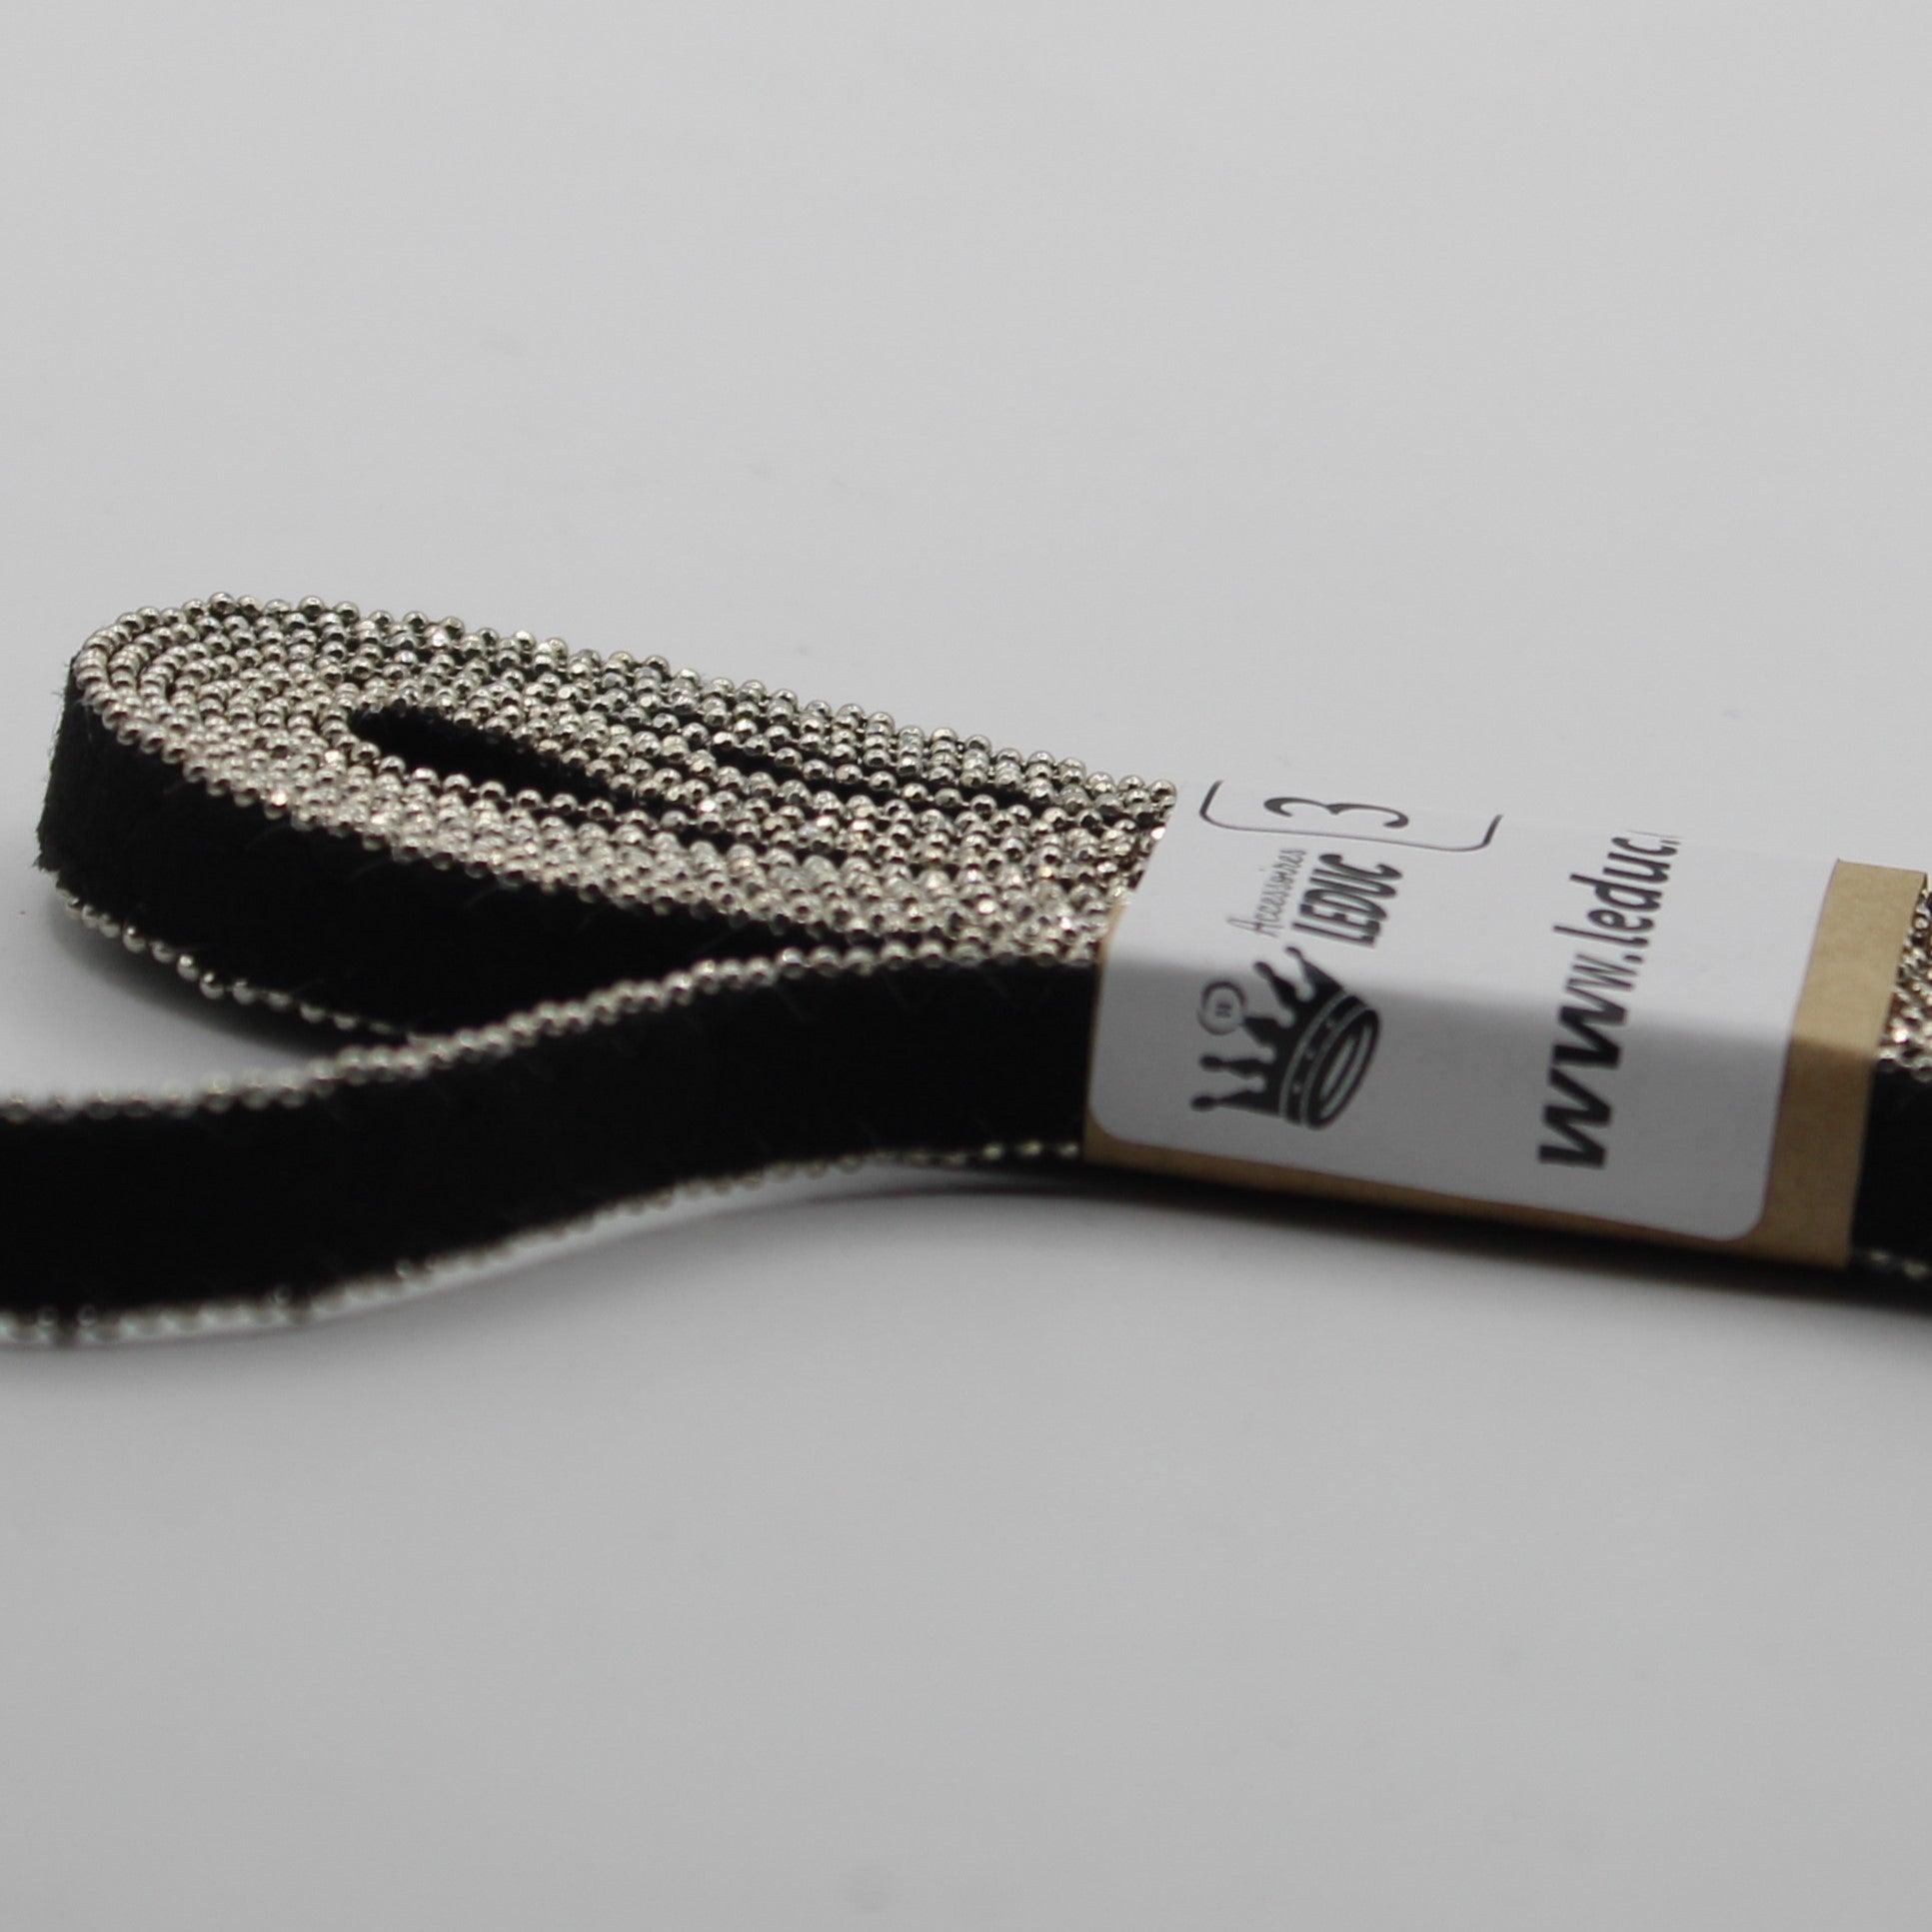 3 meters 10mm Suede Tape with double Beaded Chain sew on #PAS3000 - ACCESSOIRES LEDUC